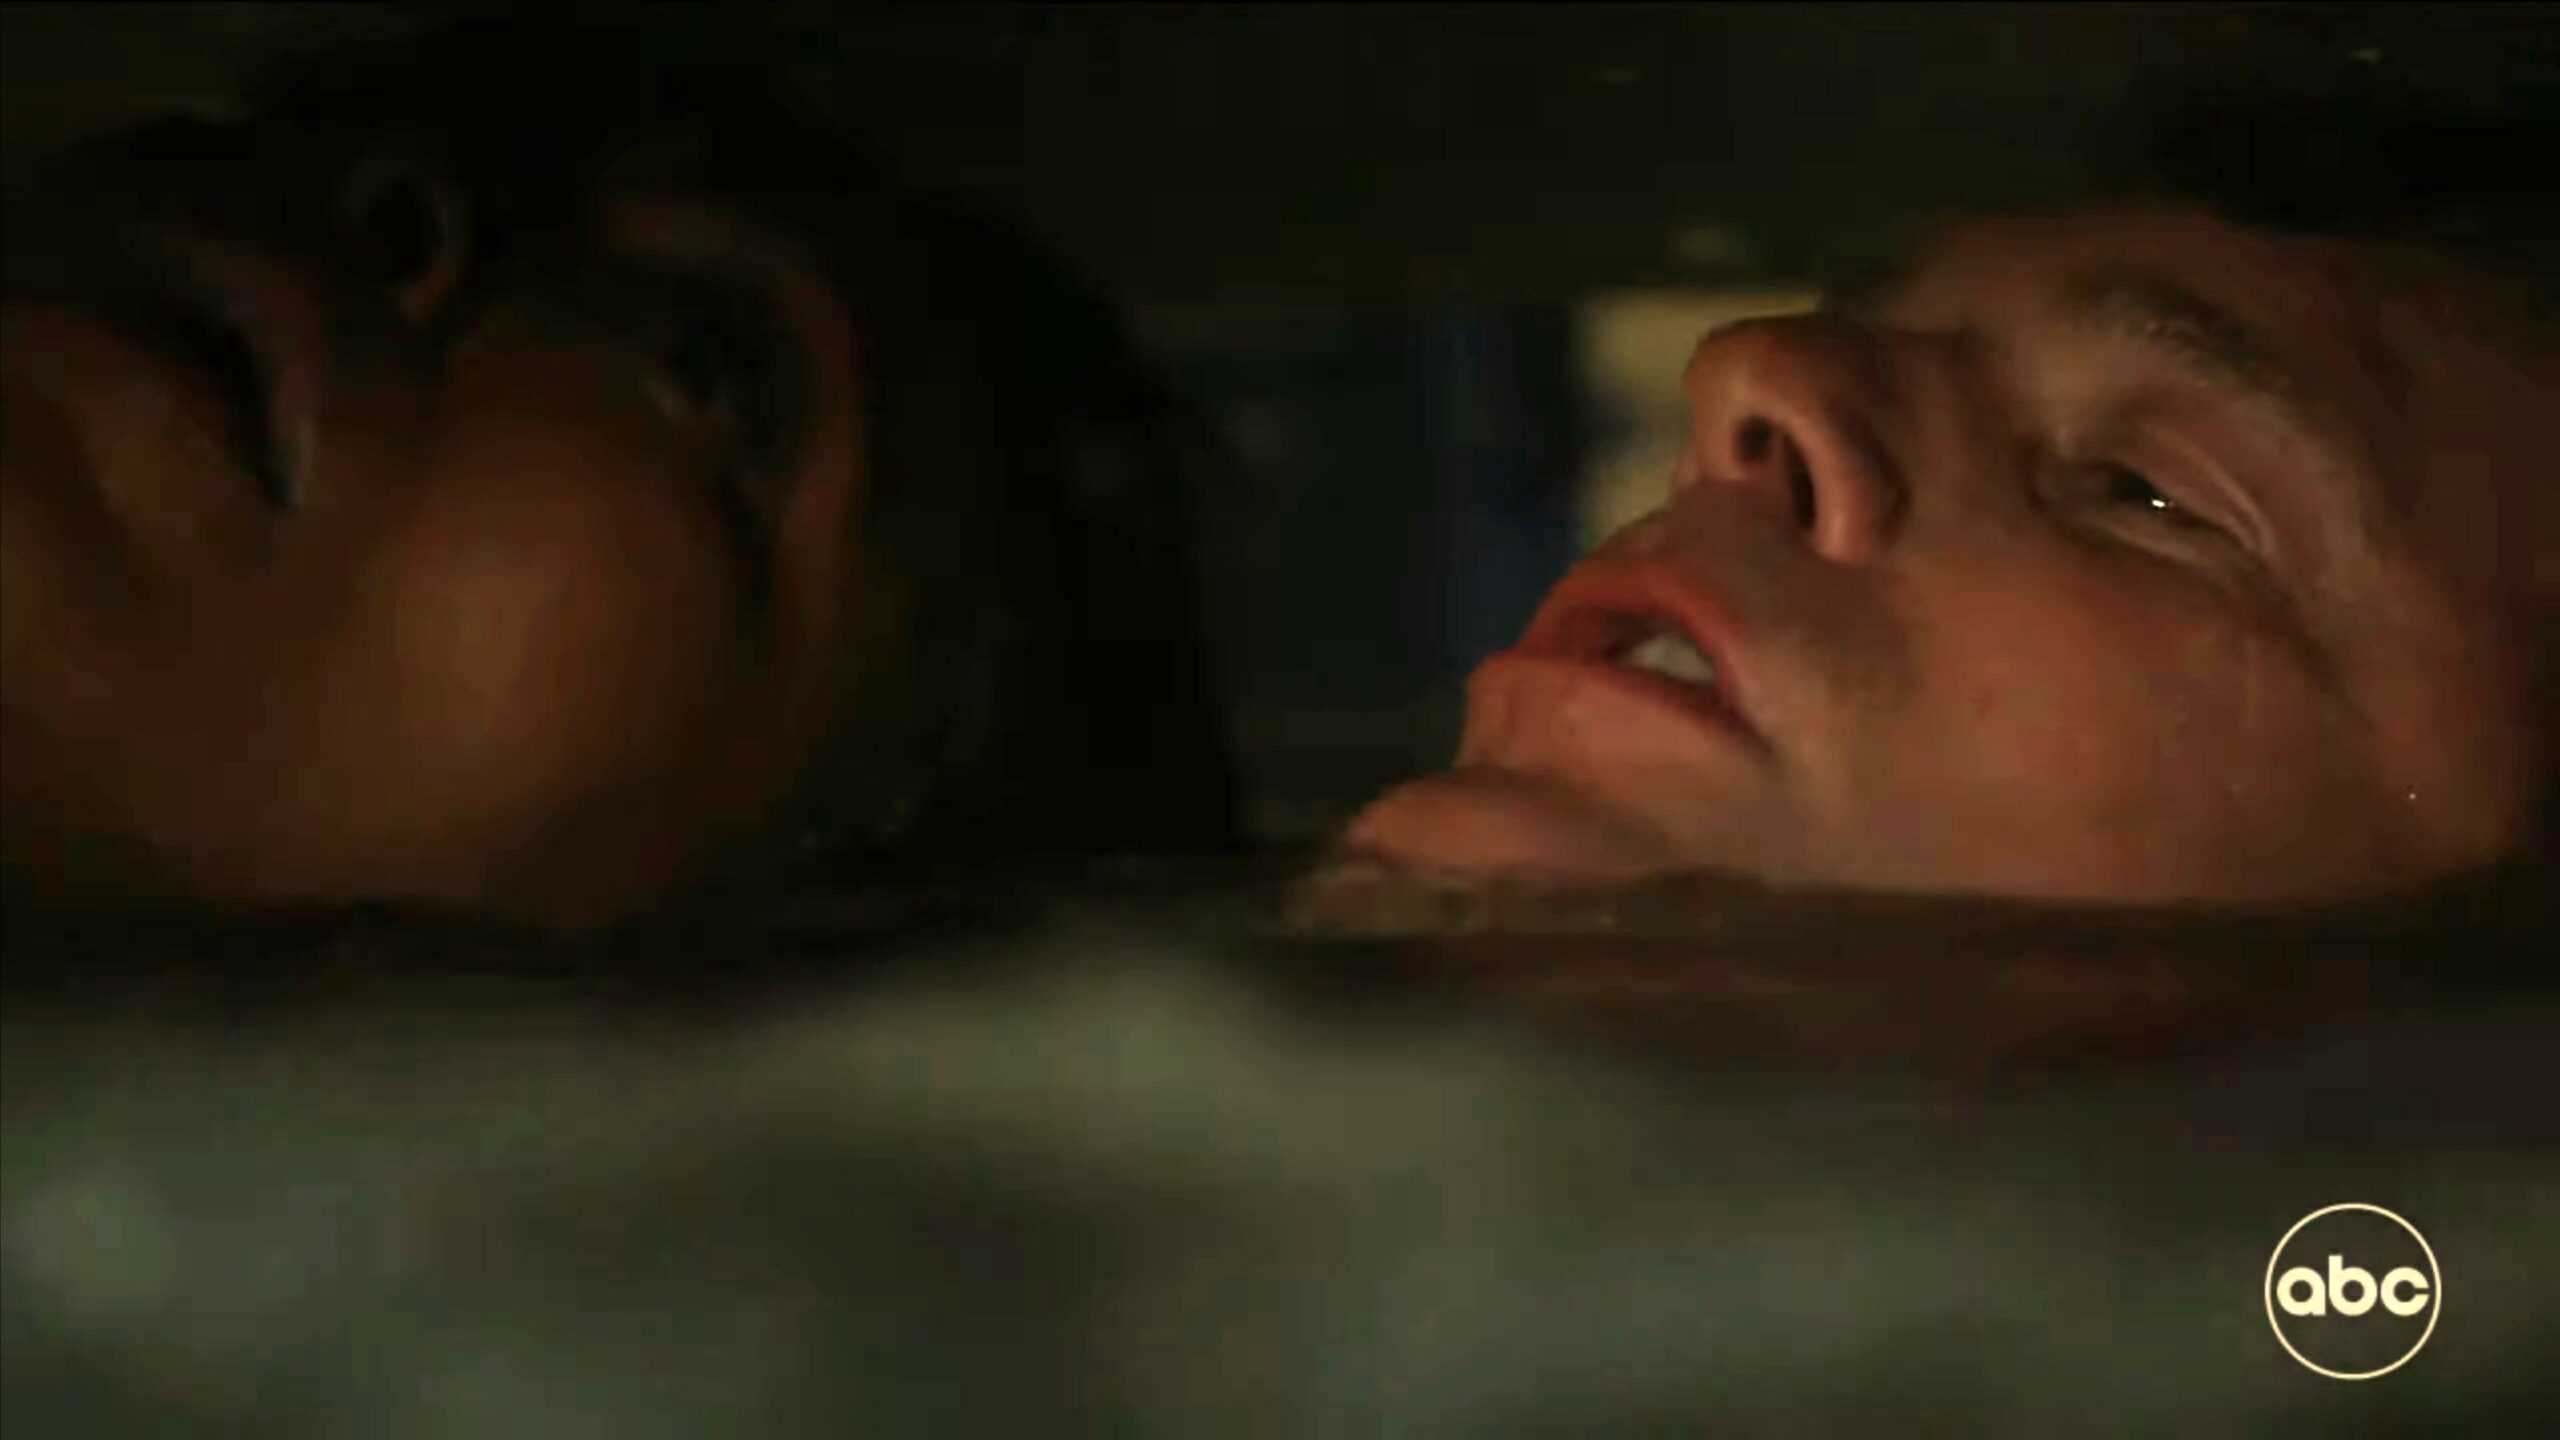 Angela Bassett as Athena and Peter Krause as Bobby drowning